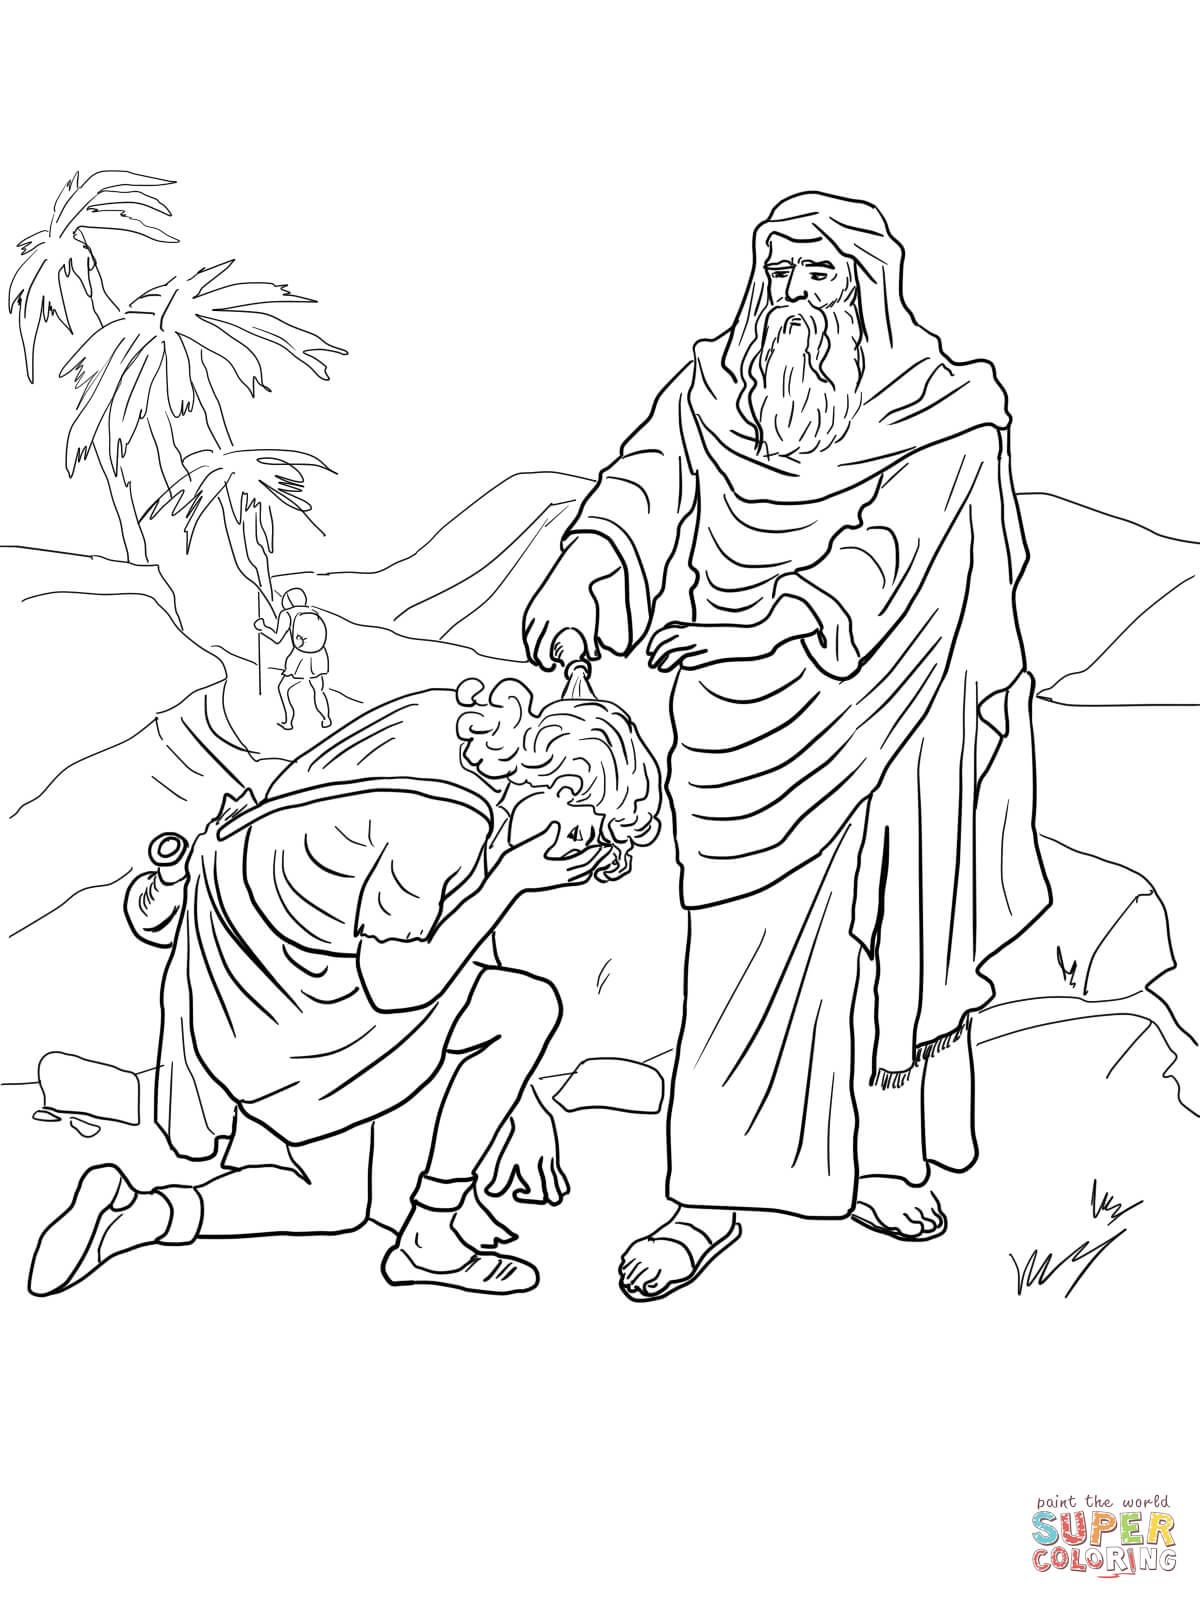 King David coloring pages | Free Coloring Pages